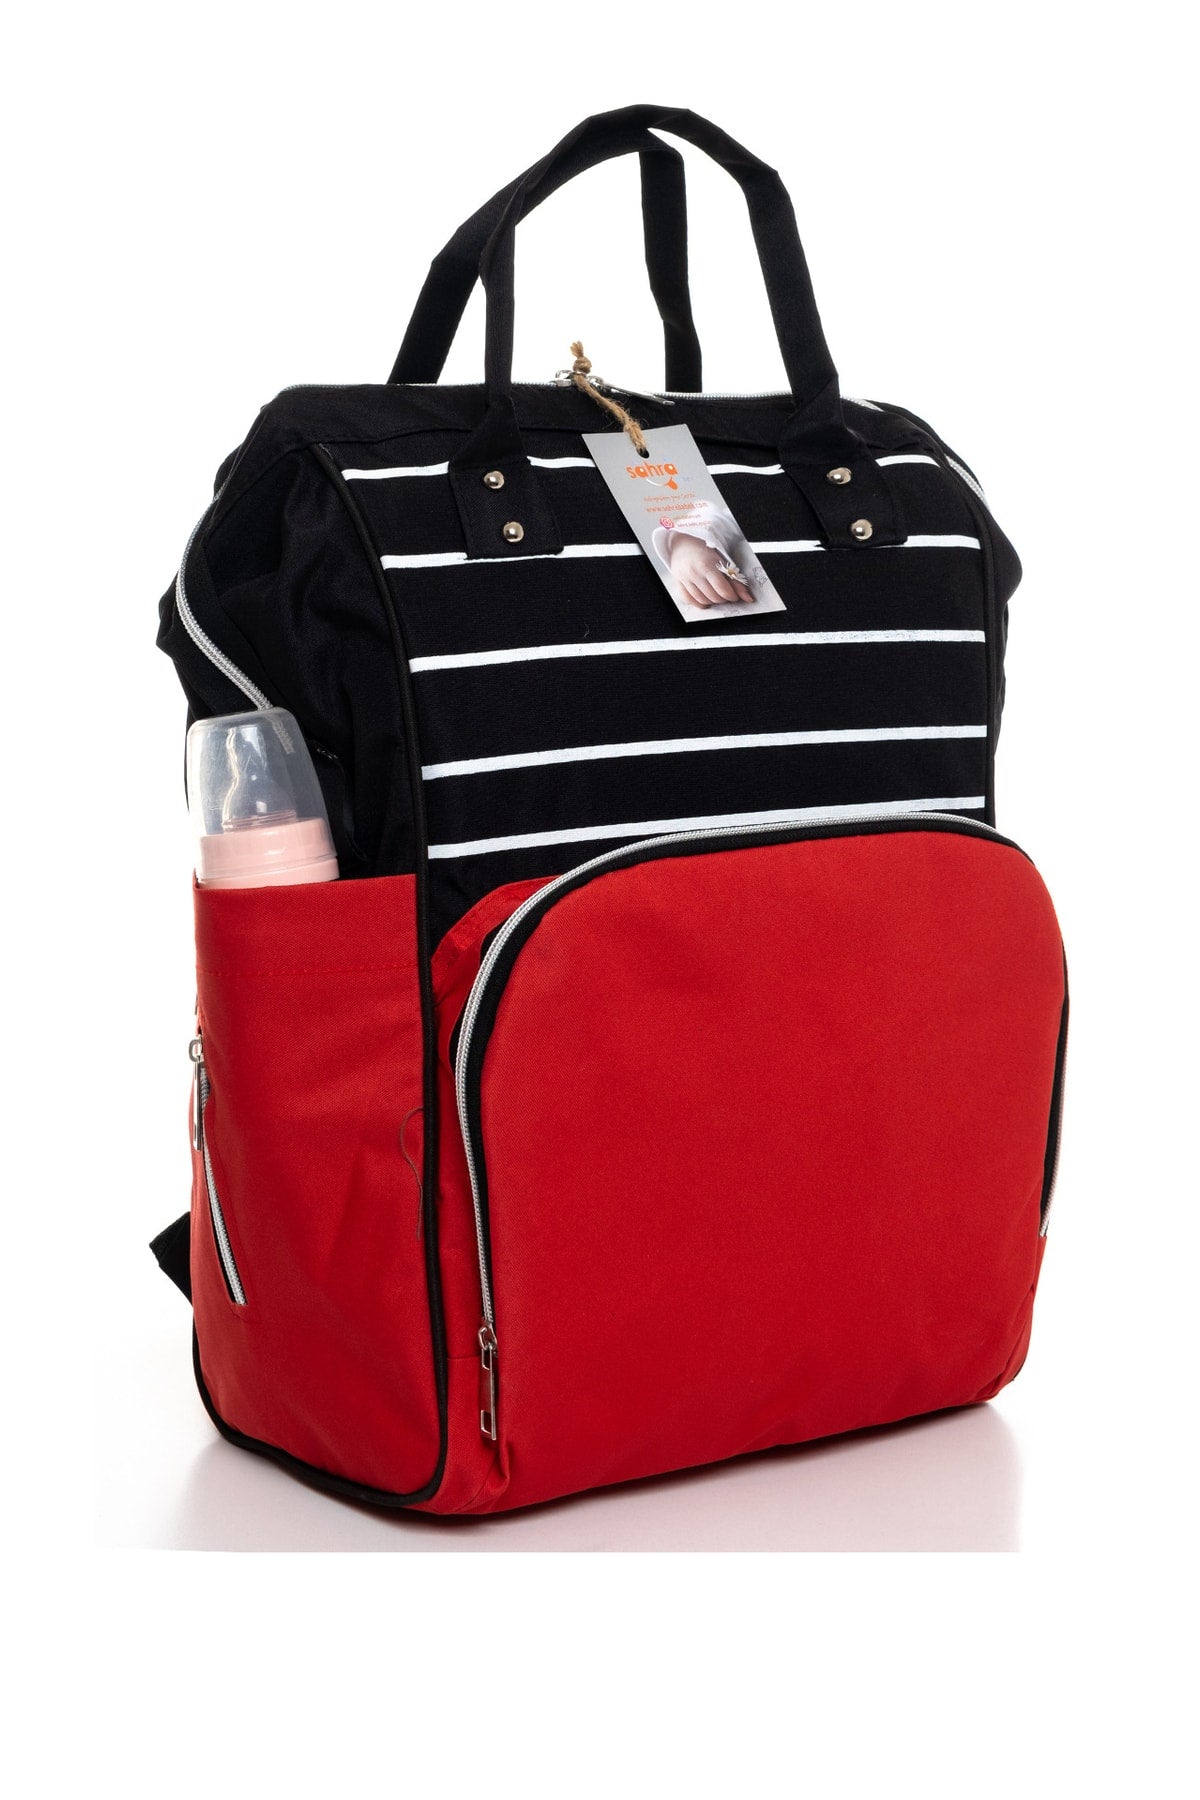 Stain Resistant Waterproof Thermal Compartment Striped Mother Baby Care Backpack Black-red